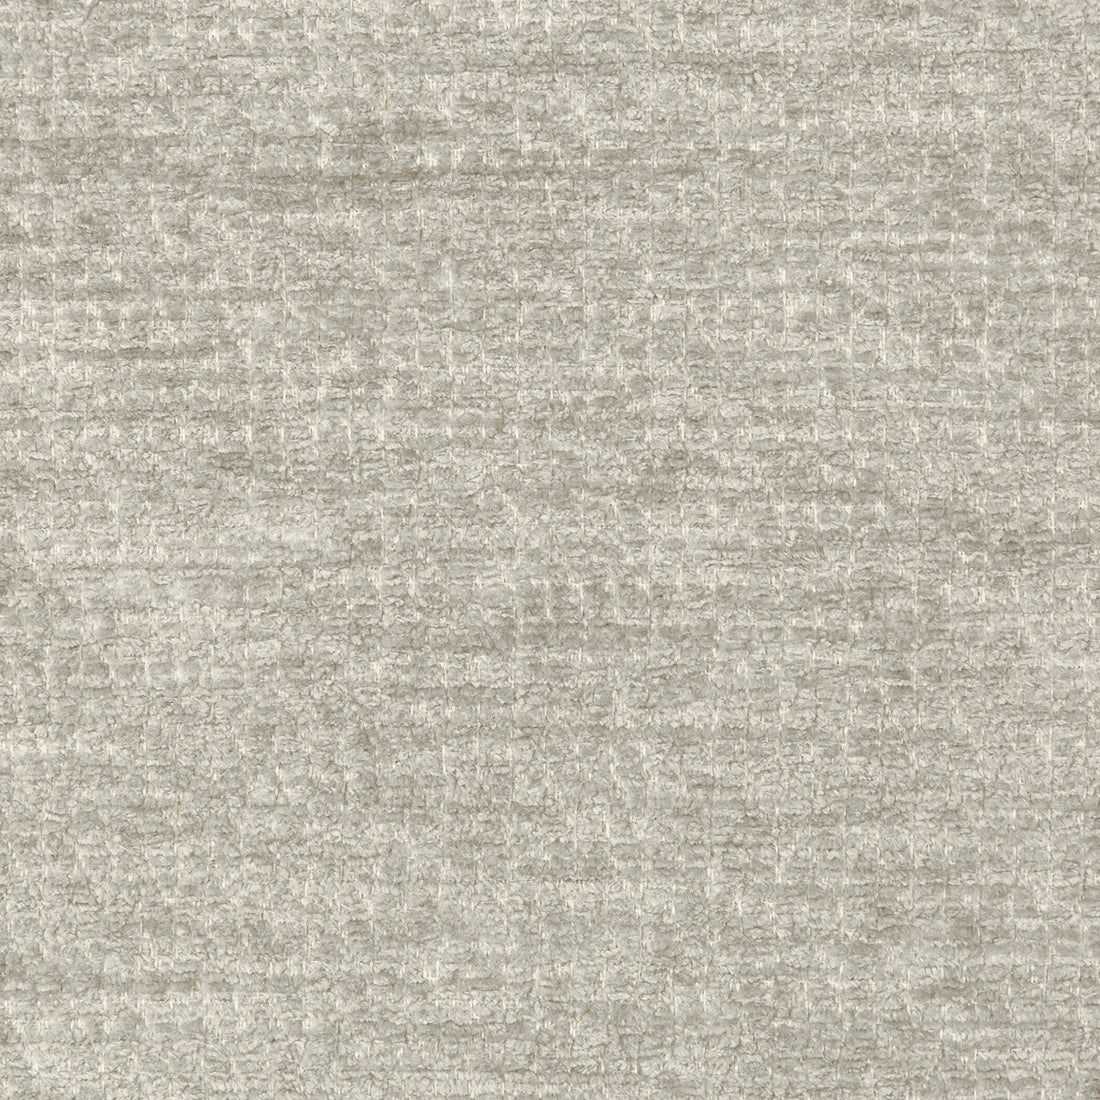 Cassien Texture fabric in pebble color - pattern 8019146.11.0 - by Brunschwig &amp; Fils in the Chambery Textures II collection